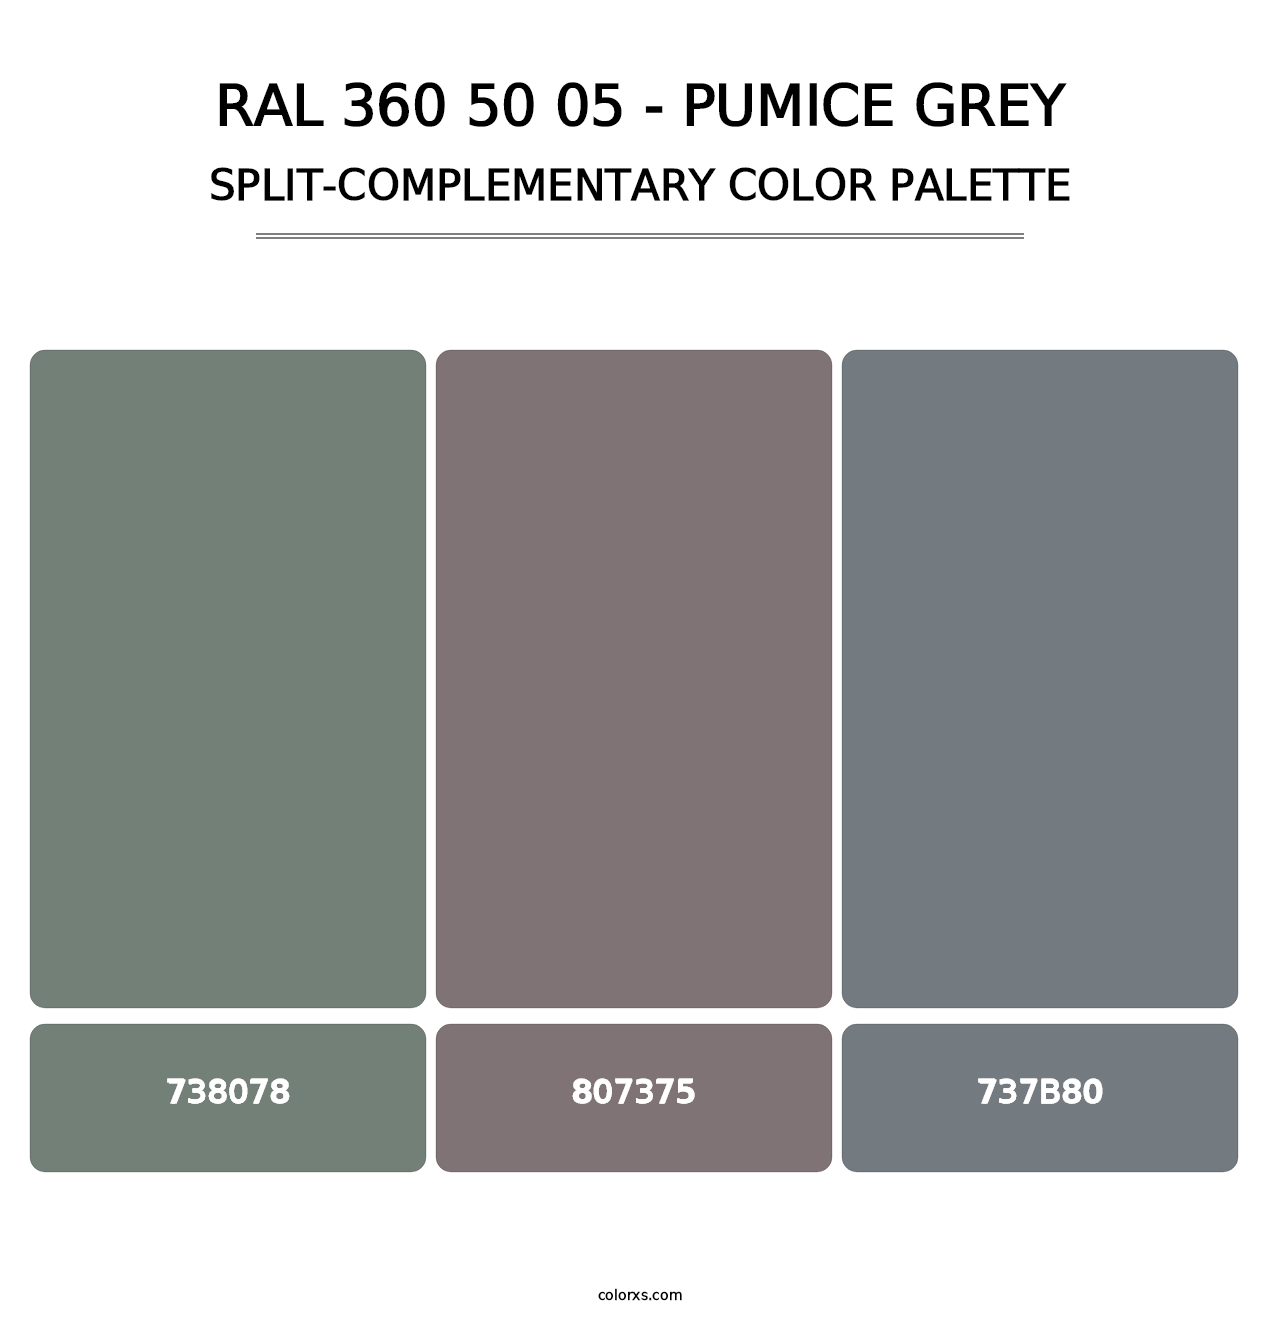 RAL 360 50 05 - Pumice Grey - Split-Complementary Color Palette